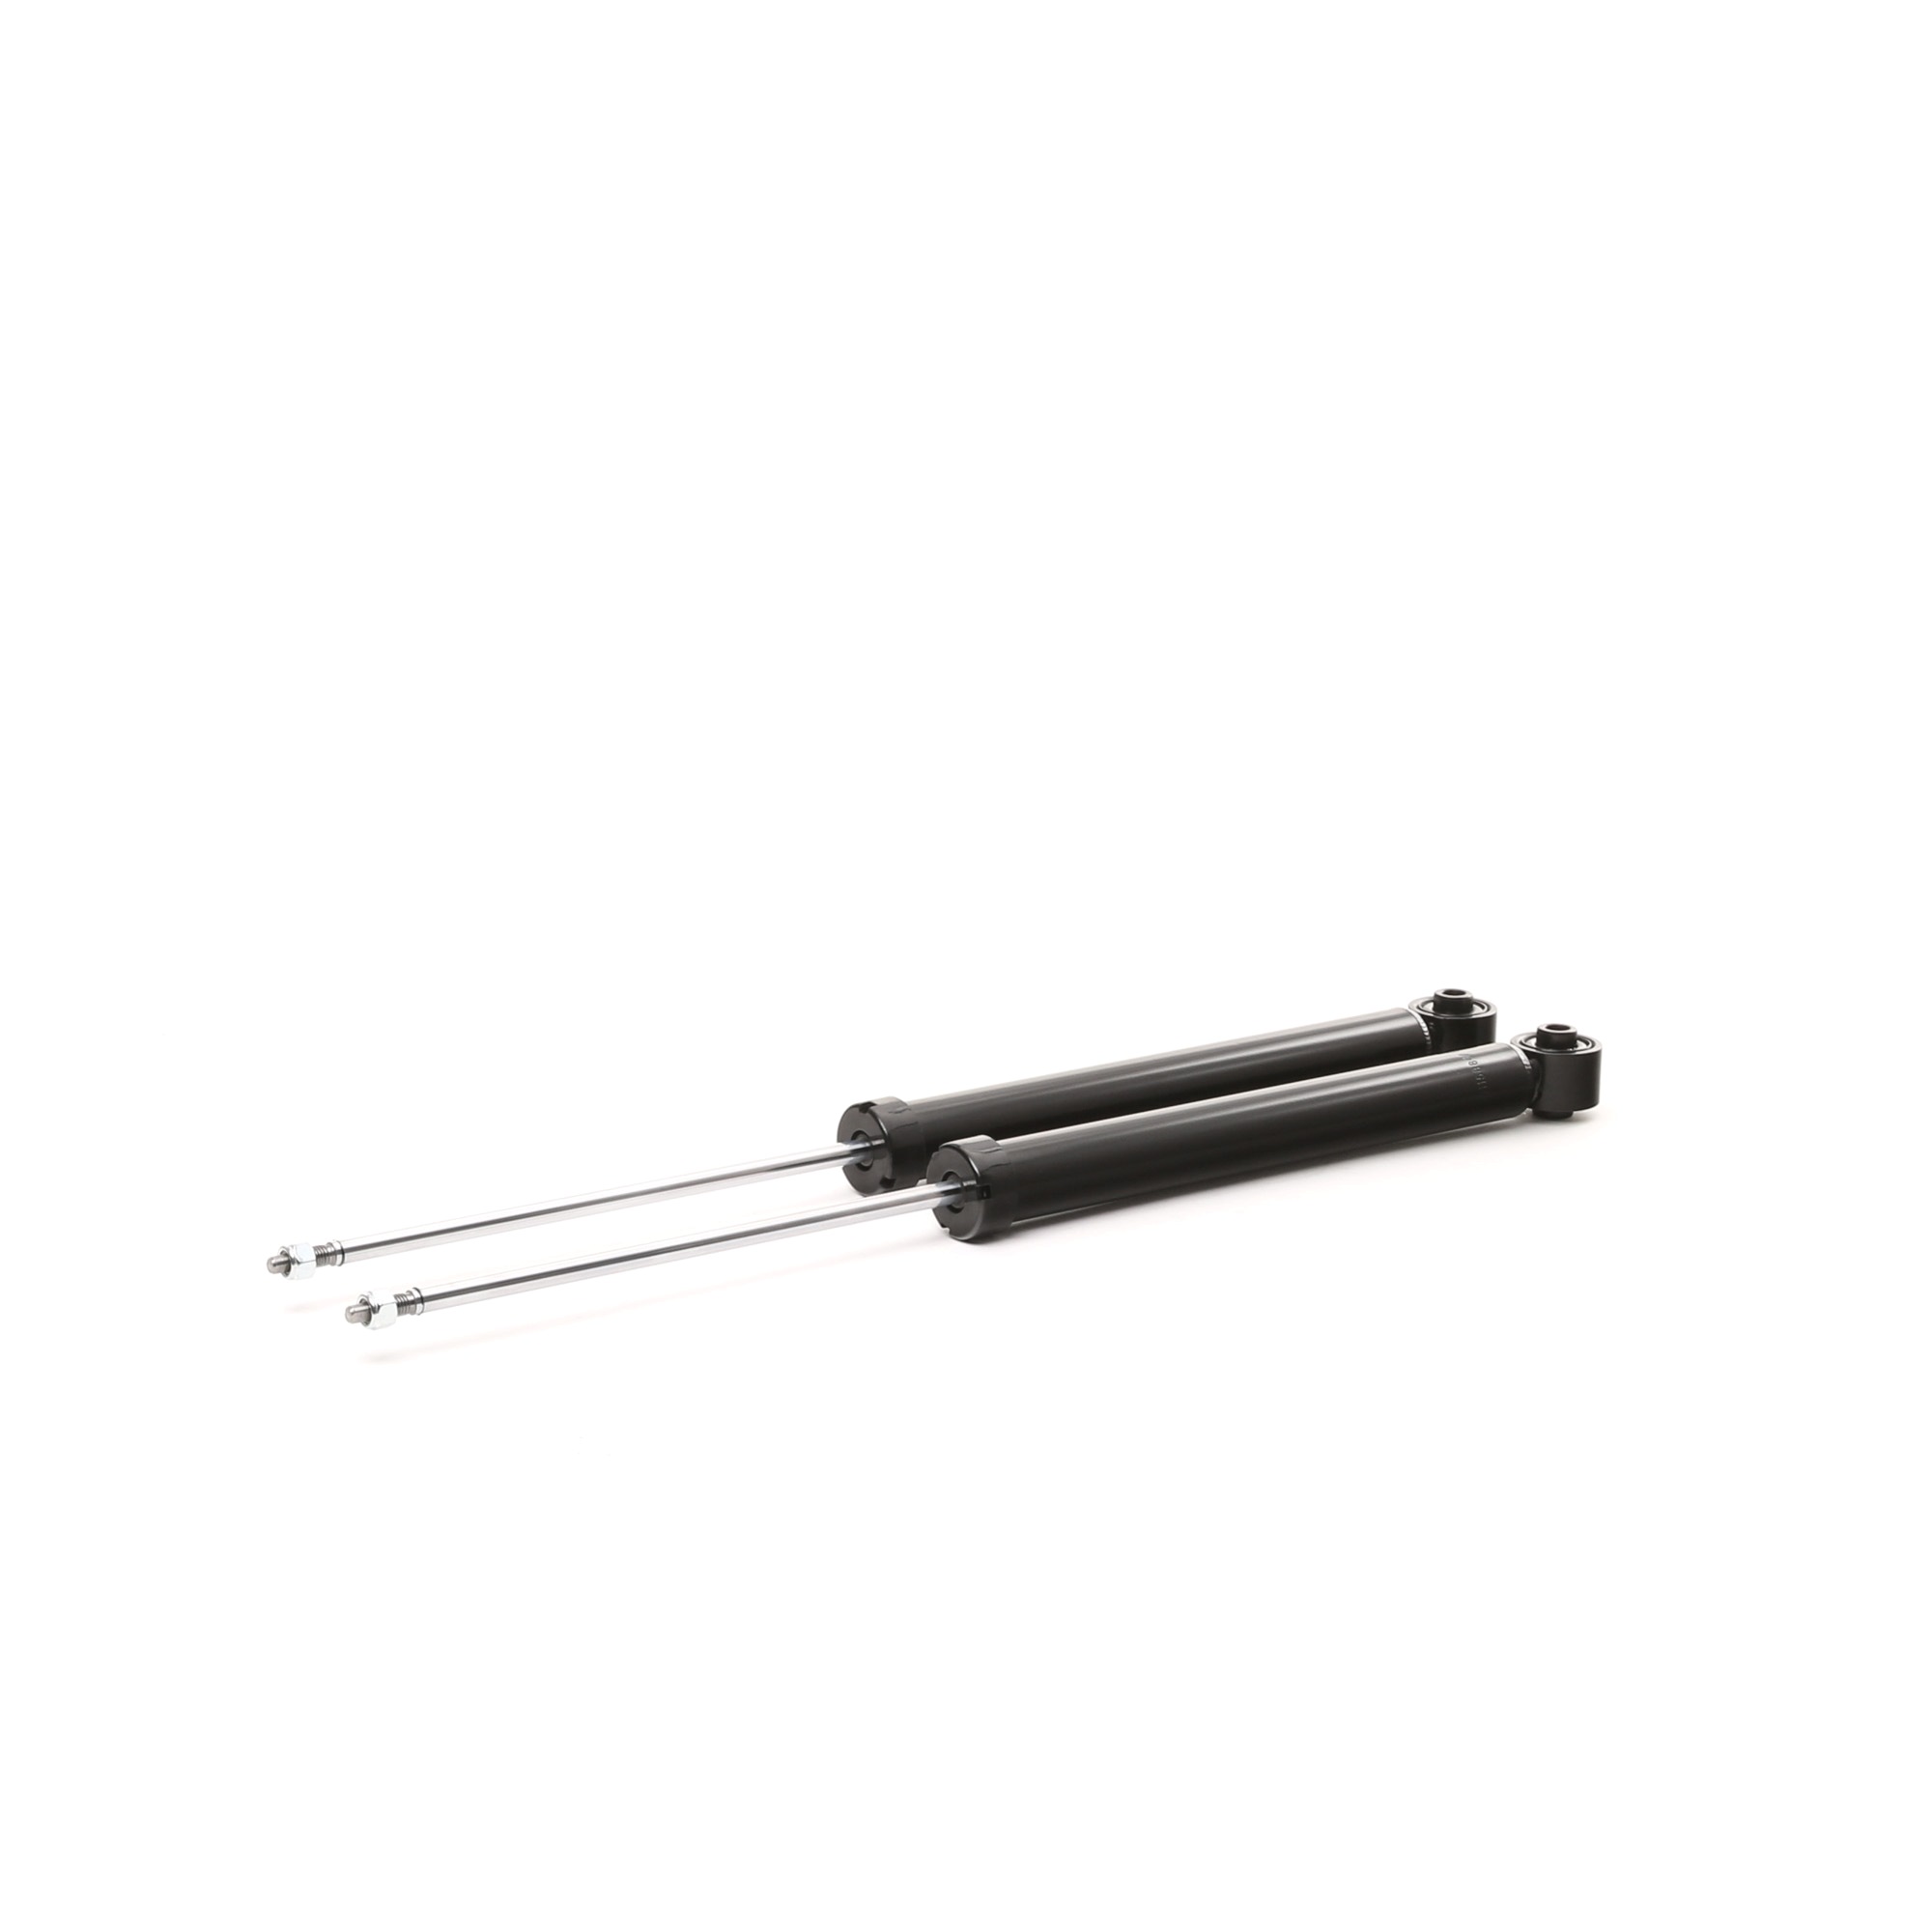 STARK SKSA-0133223 Shock absorber Rear Axle, Gas Pressure, Twin-Tube, Absorber does not carry a spring, Telescopic Shock Absorber, Top pin, Bottom eye